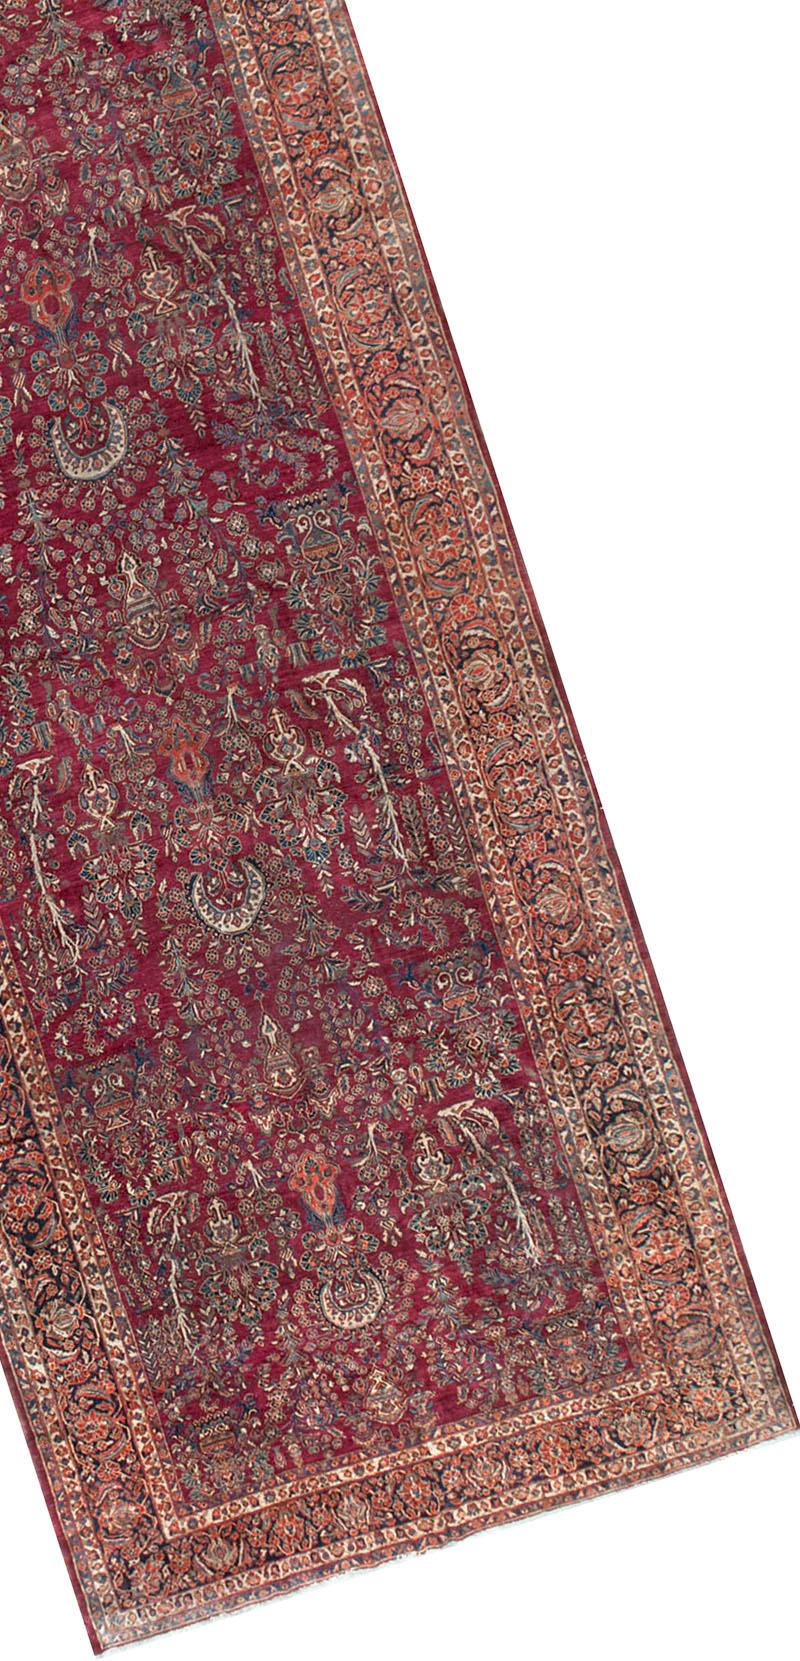 Hand-Woven Vintage Fine Persian Sarouk circa 1920 Gallery Rug 9' x 23'5 For Sale